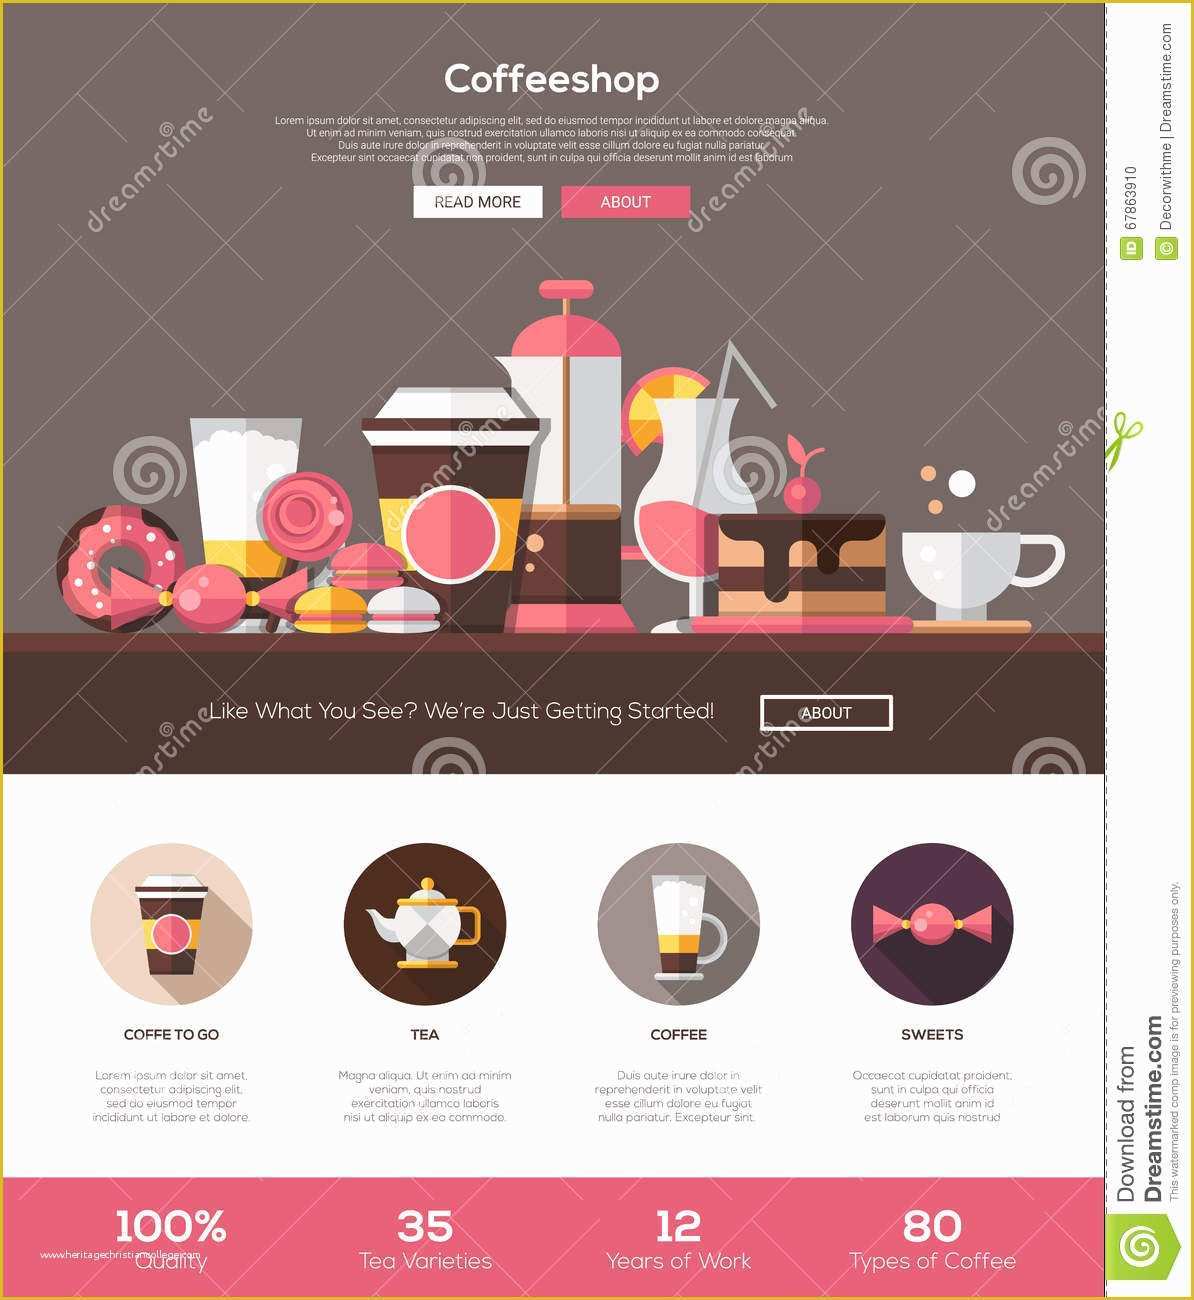 Coffee Shop Website Template Free Of Coffee Shop Cafe Bakery Website Template with Header and